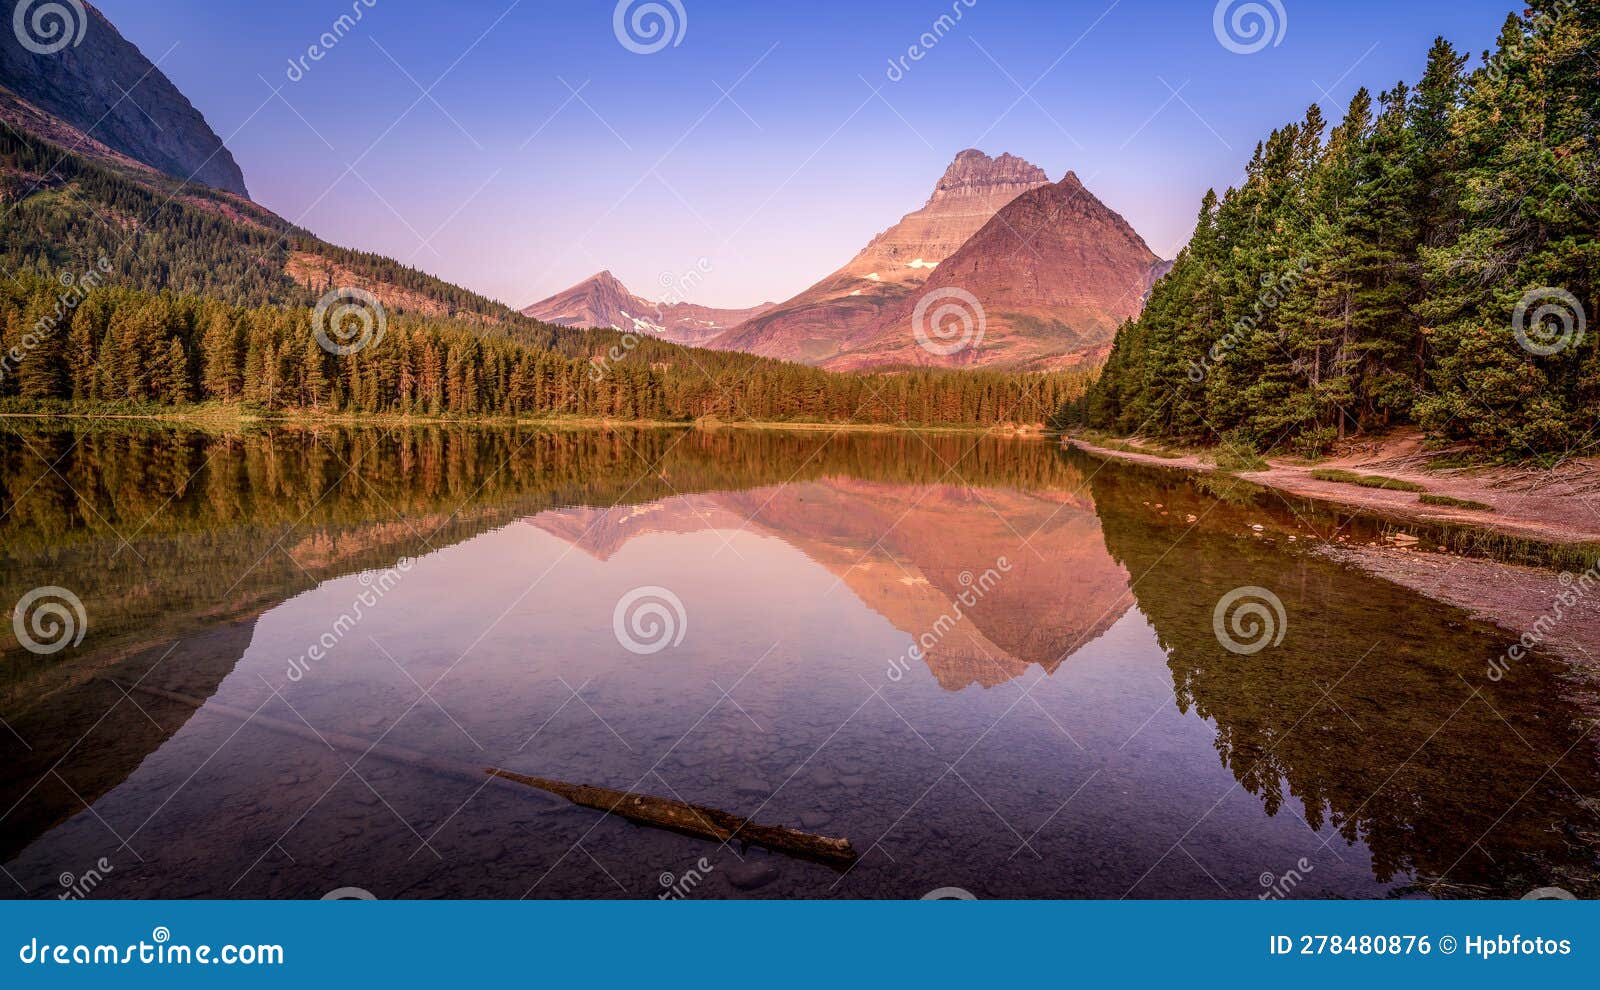 mt. wilbur reflection in the smooth surface of fishercap lake at sunrise in glacier national park